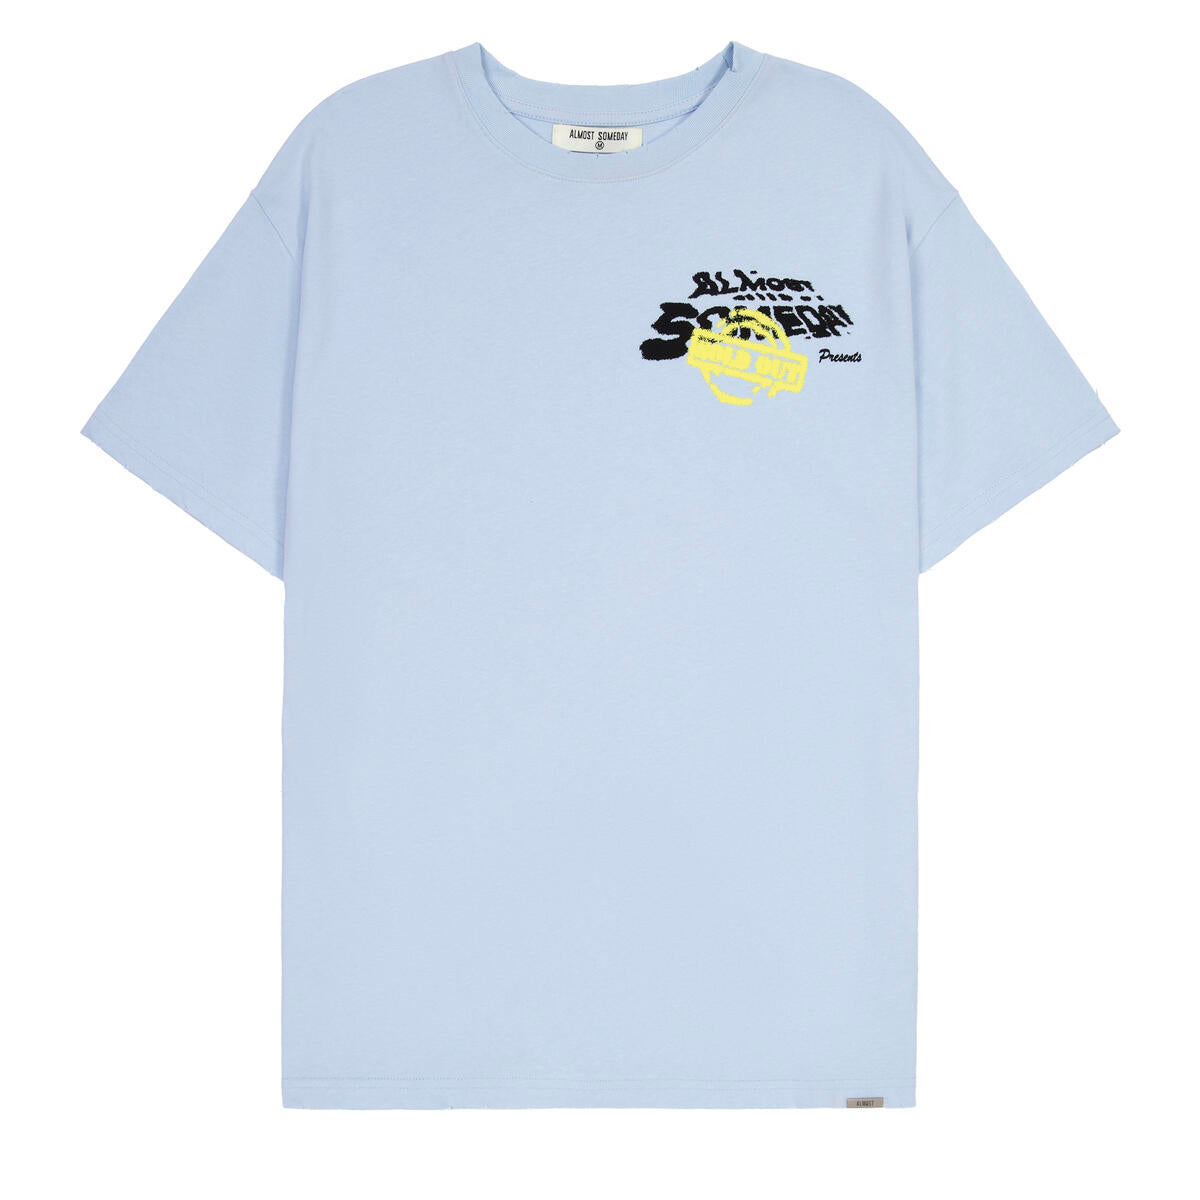 Almost Someday "DREAMING TEE" (BABY BLUE)